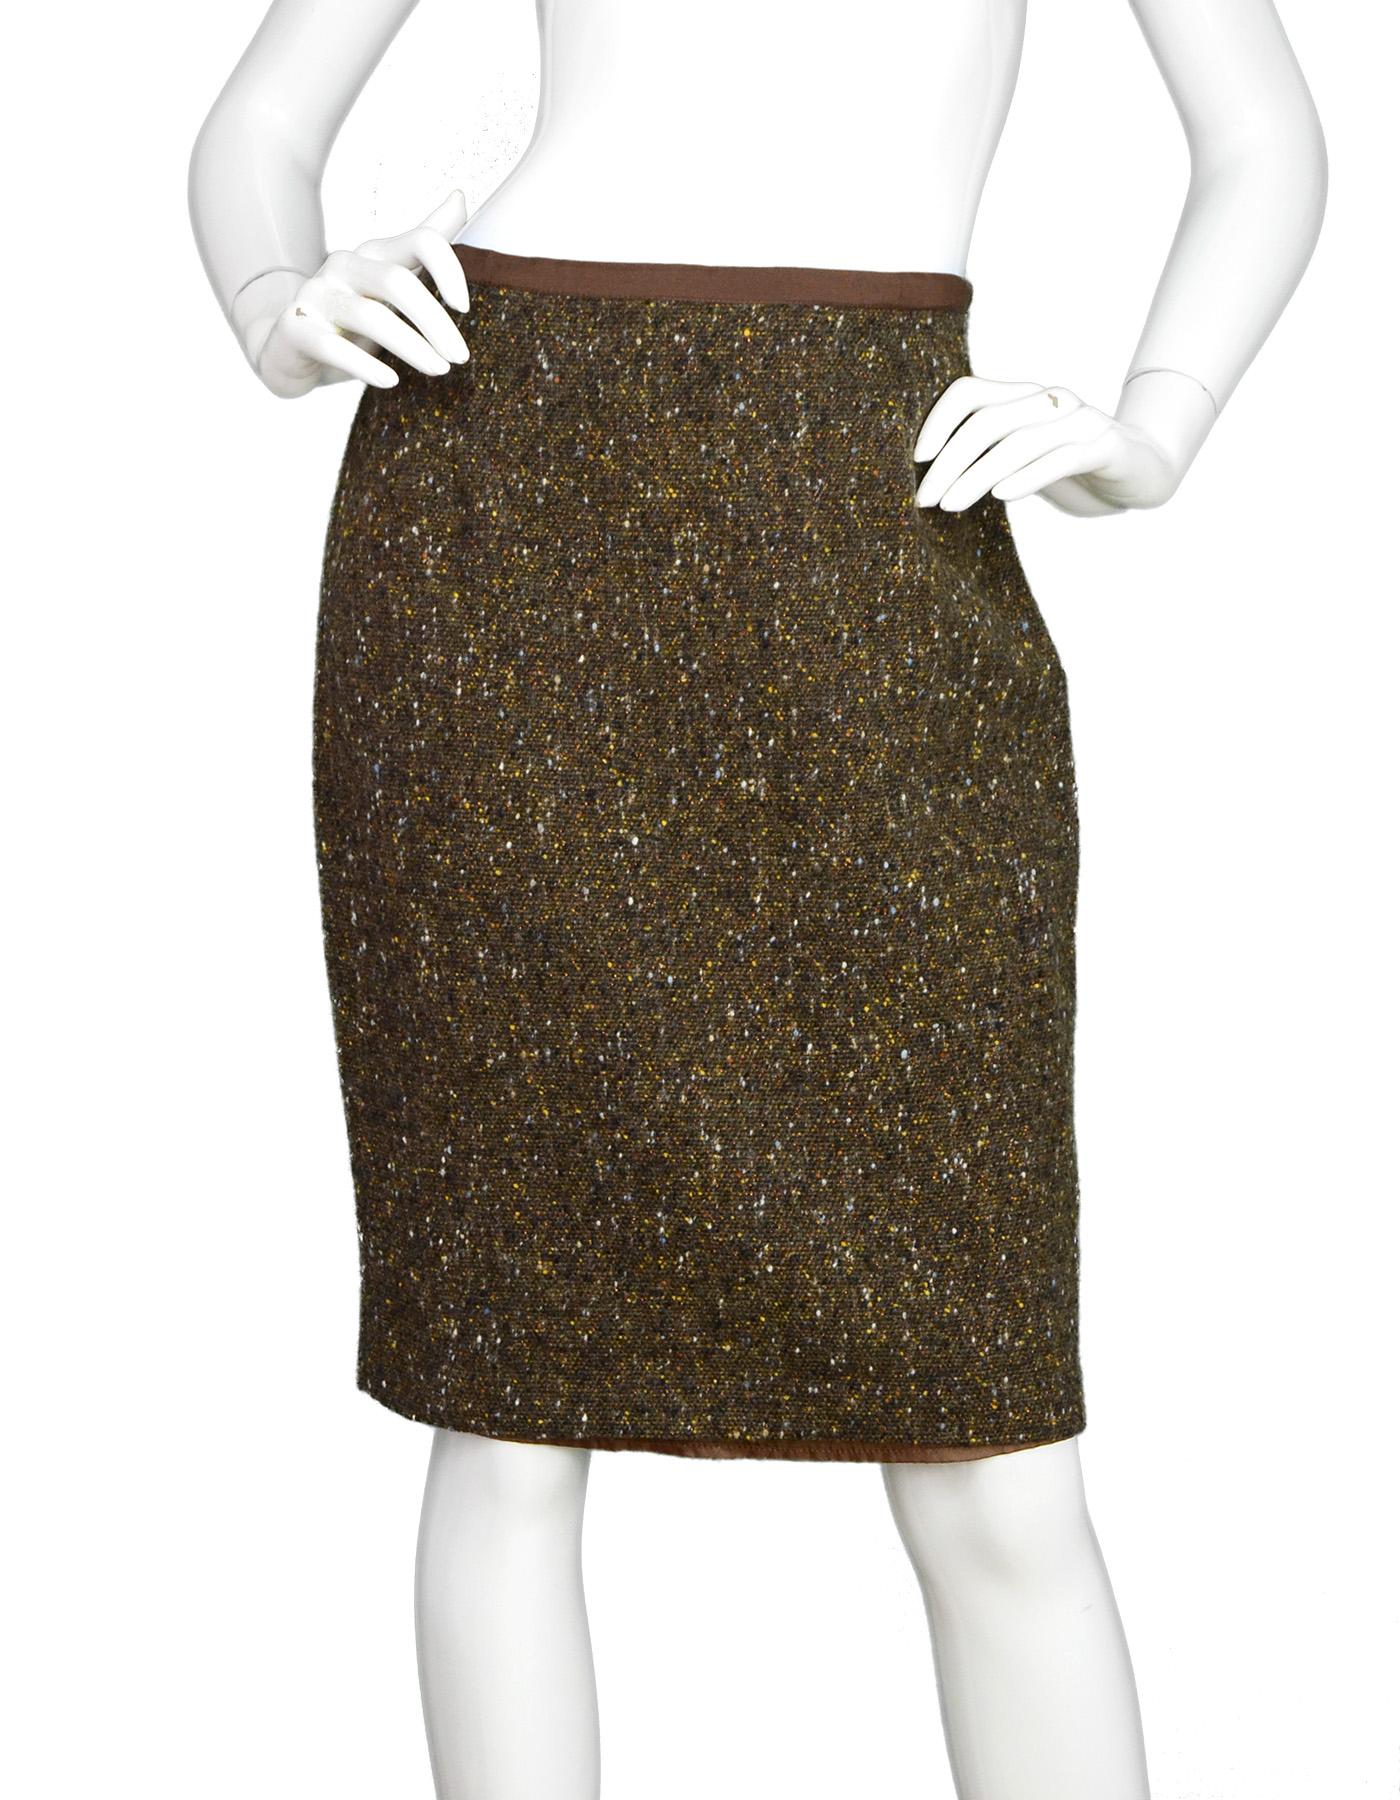 Blumarine Brown Tweed Pencil Skirt Sz 44. Pictured With Matching Brown Tweed Jacket W/ Sheared Mink Collar Sz 42, Item #15870-18.

Made In: Italy
Color: Multi-tonal brown/bronze tweed
Materials: 77% wool 15% nylon, 5% rayon, 3% polyester
Lining: 60%